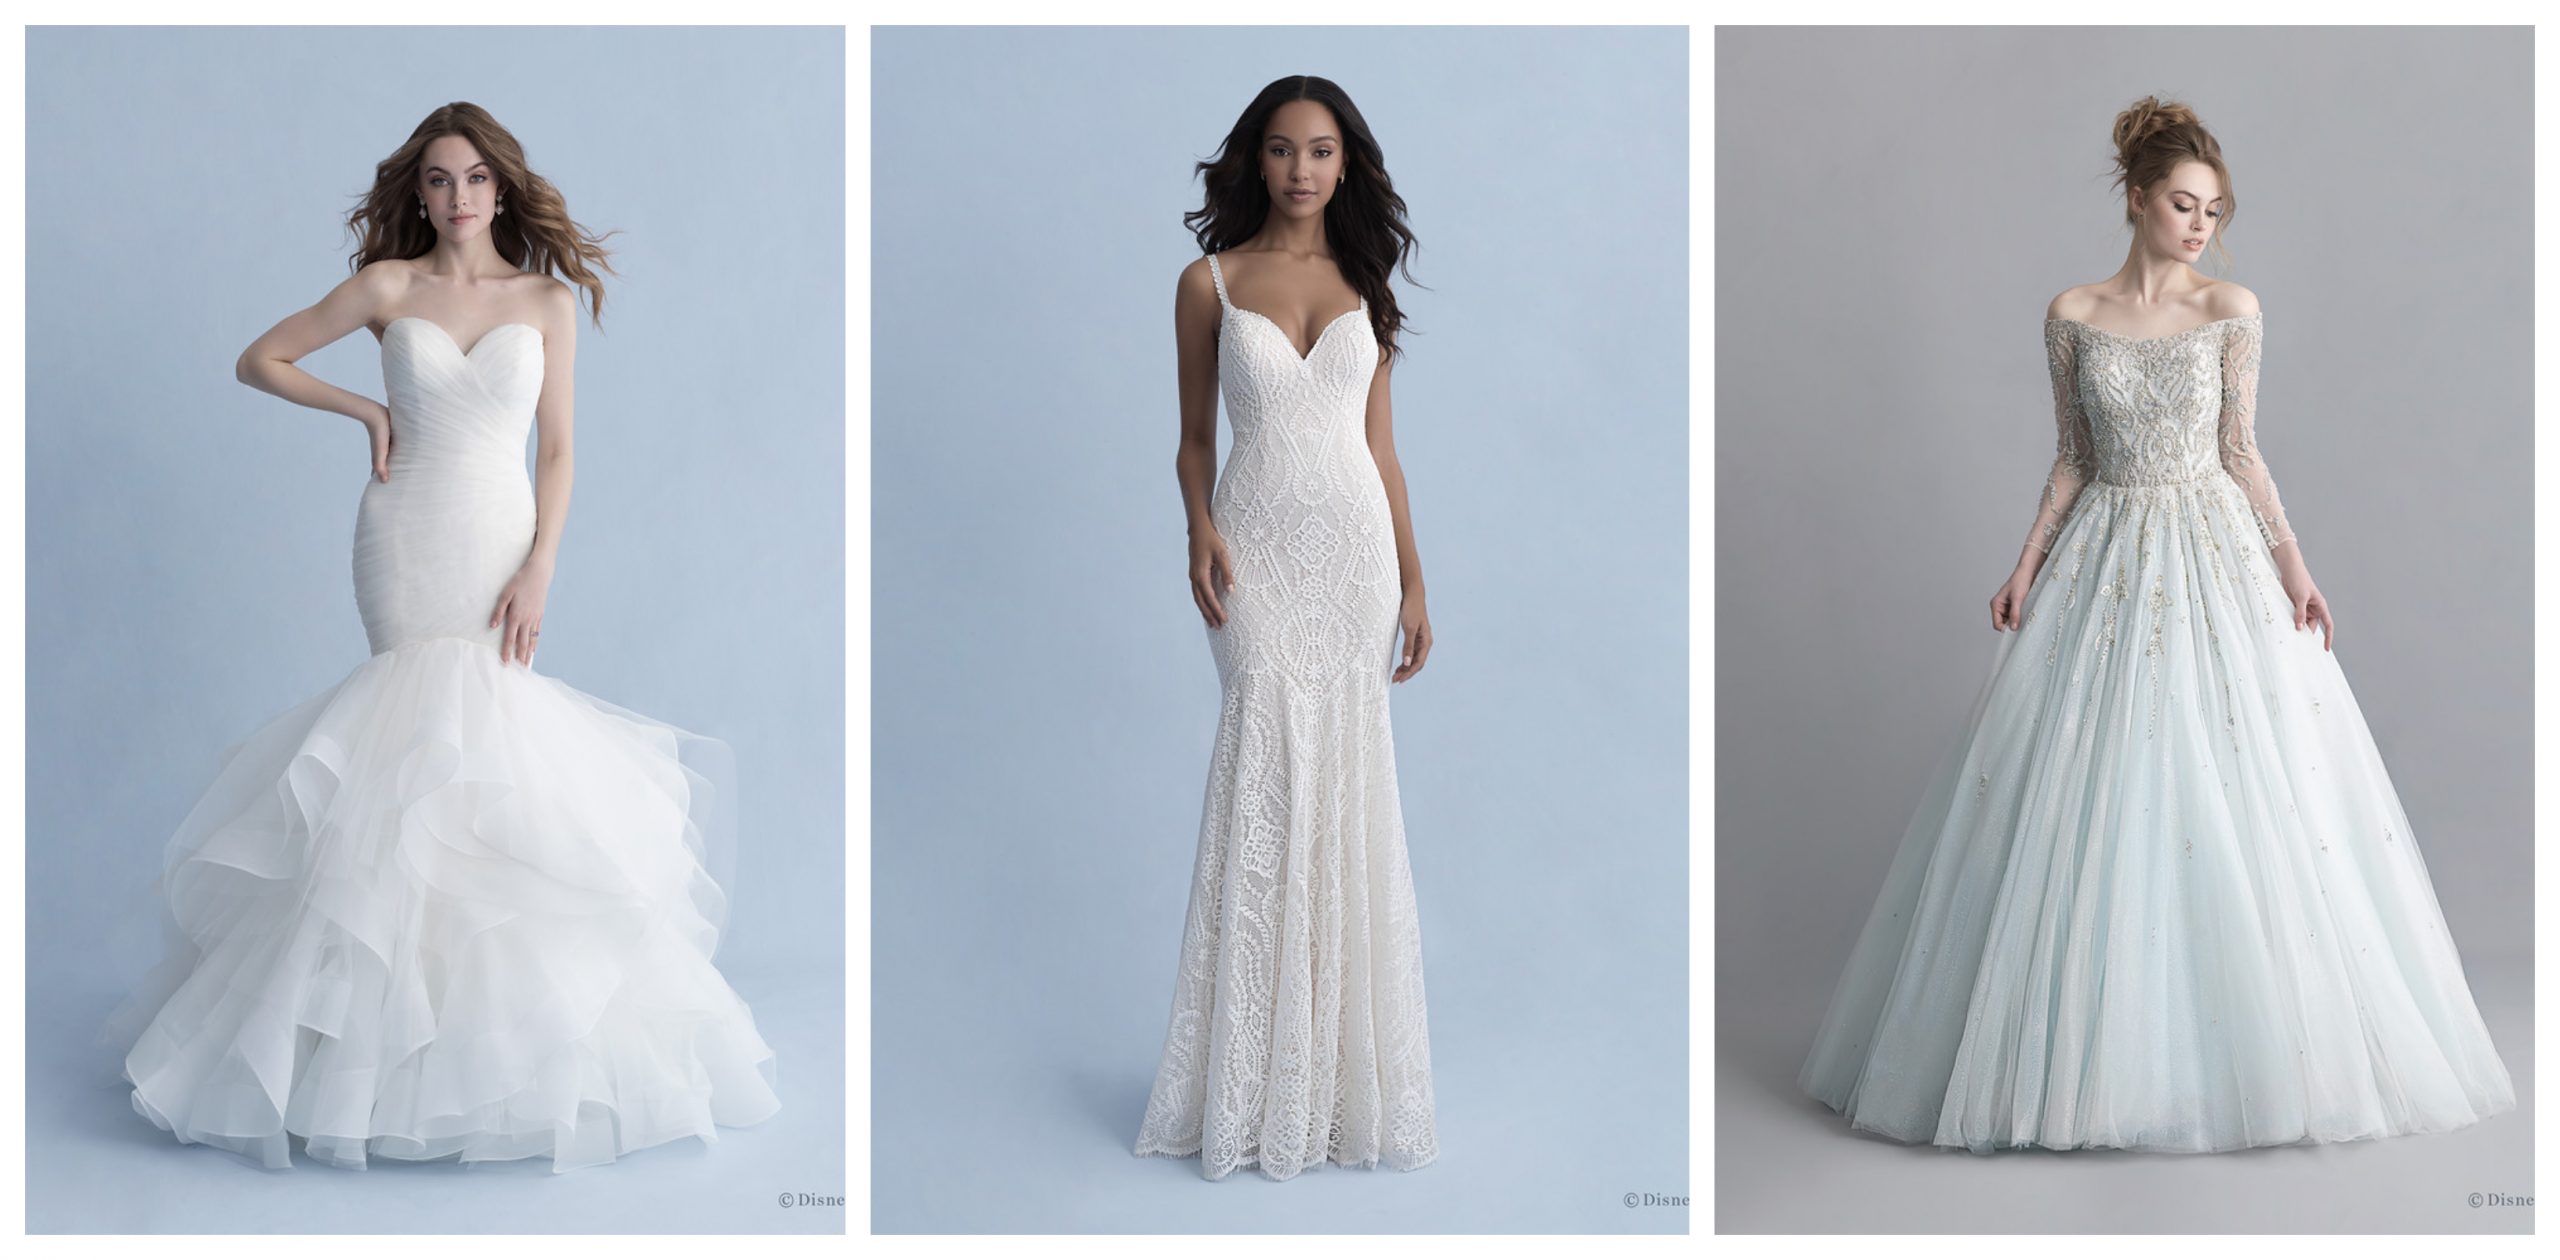 All New Disney Fairy Tale Weddings Collections Available Now!